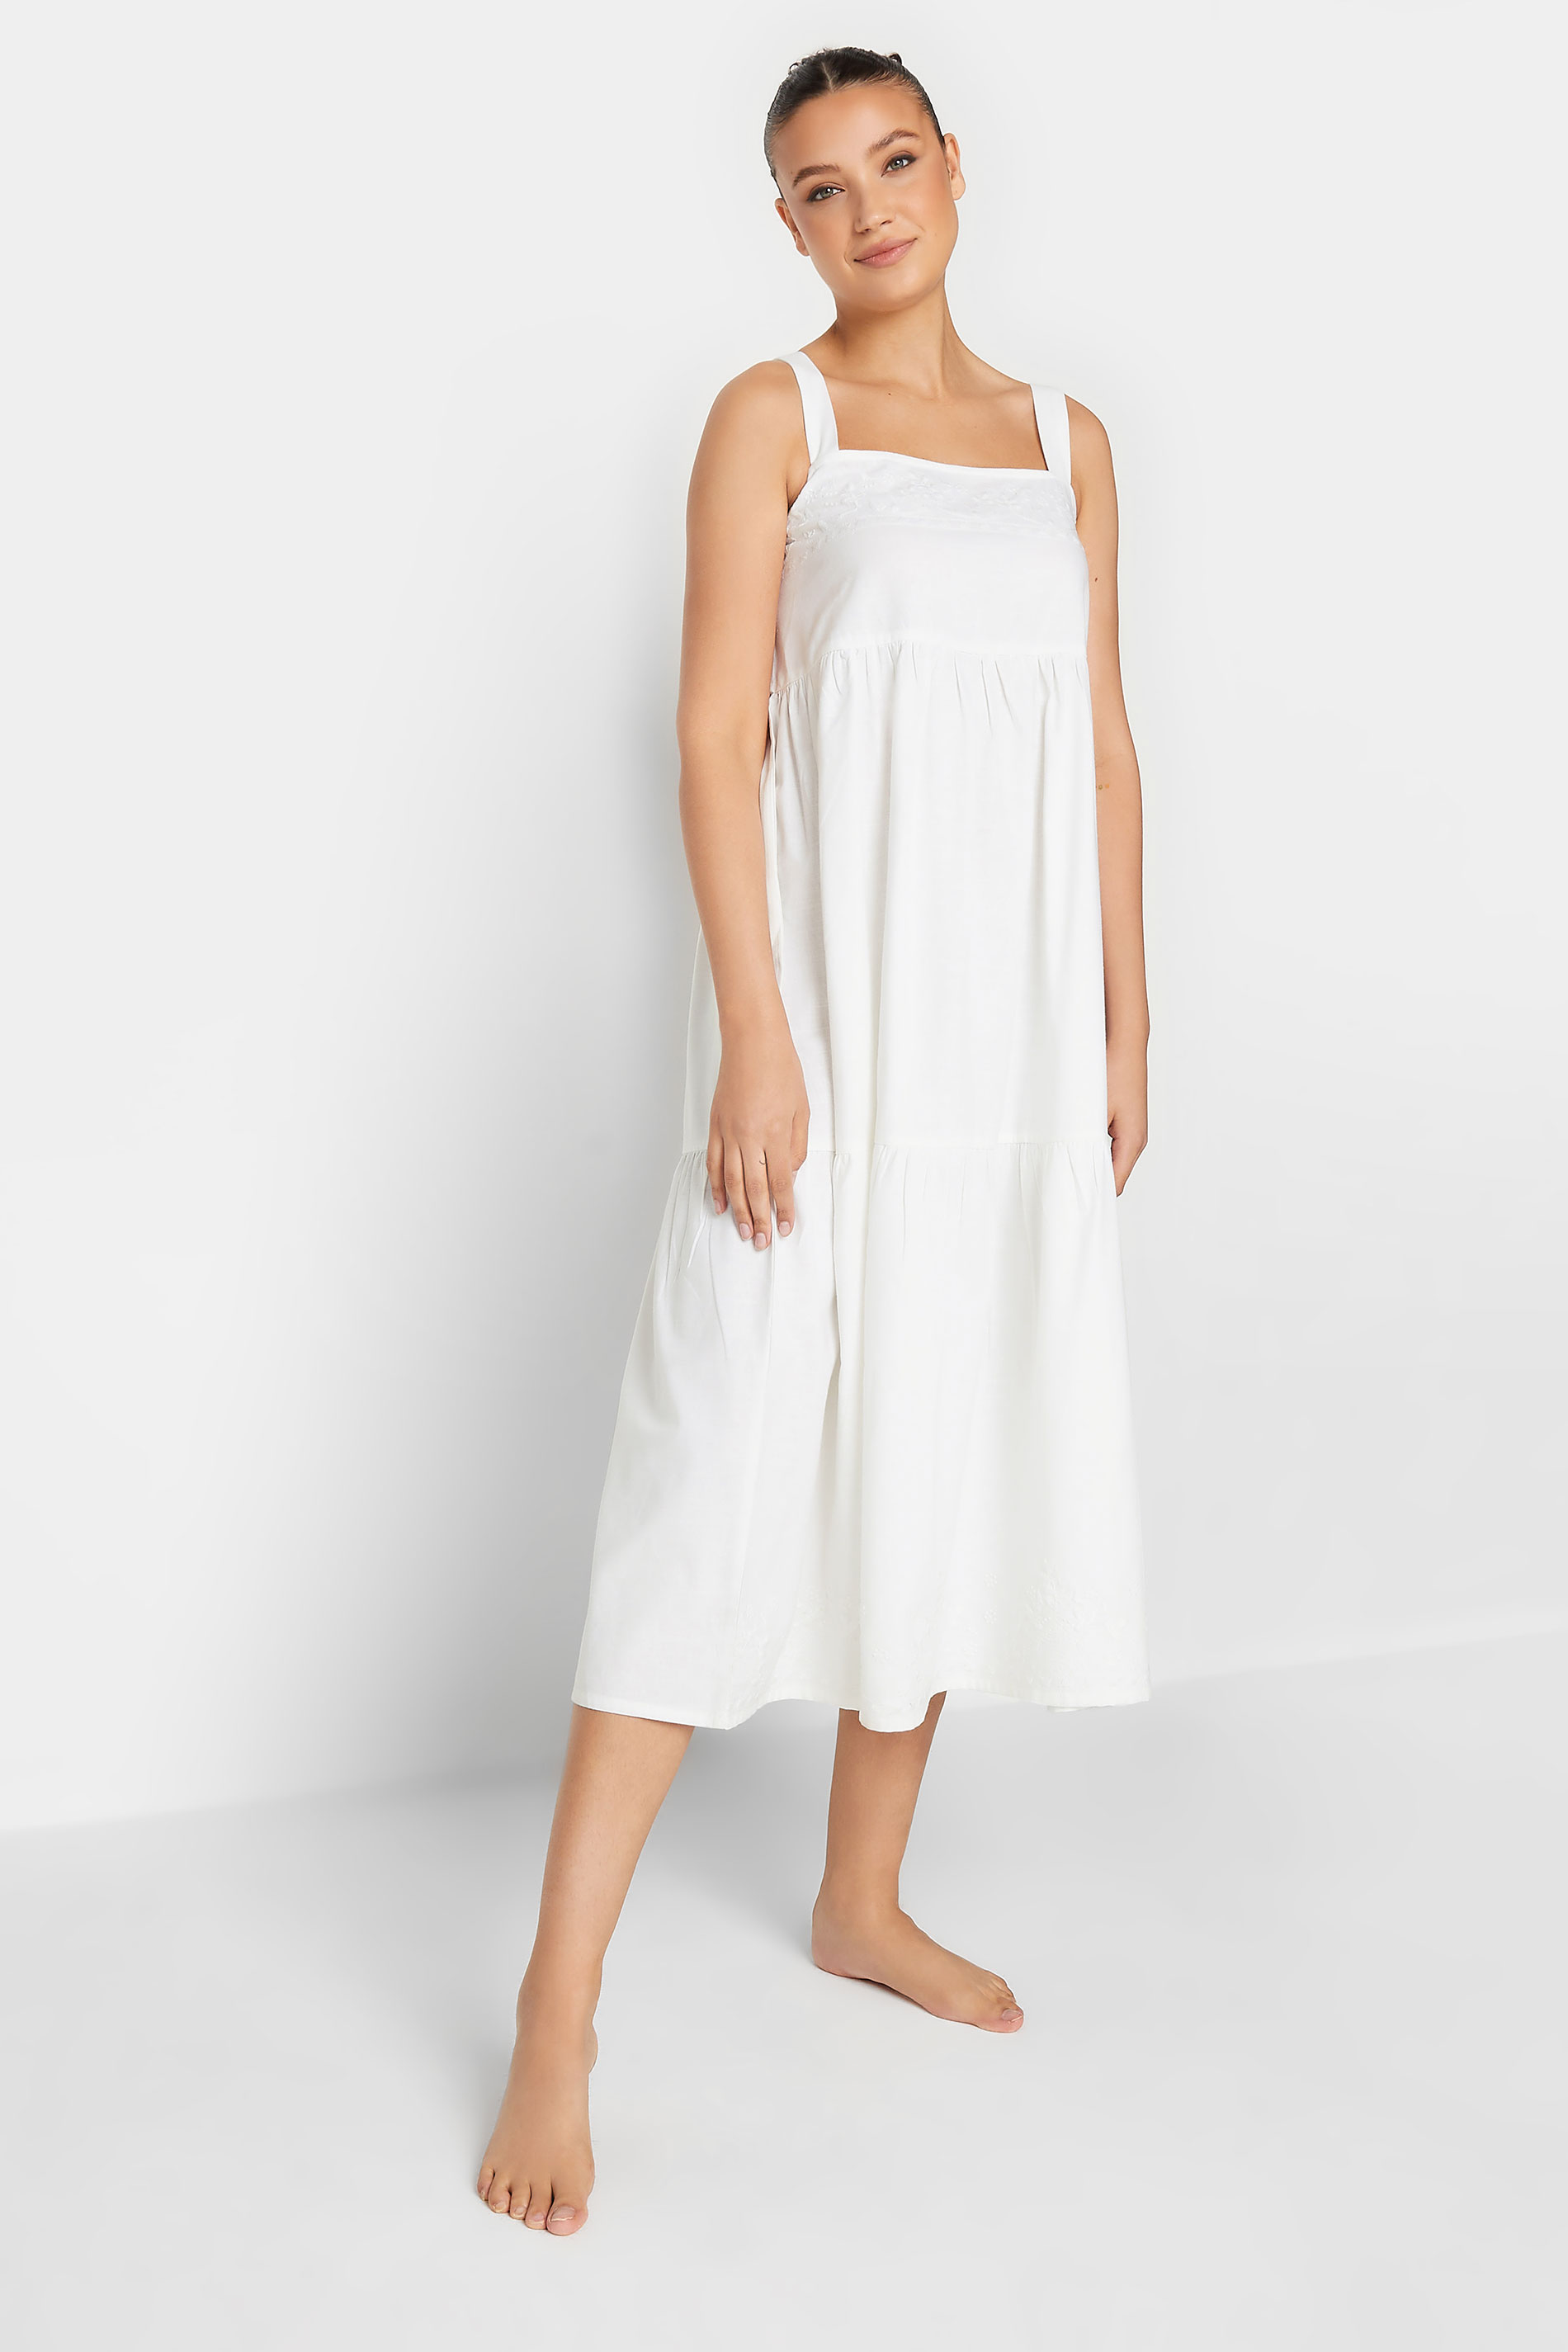 LTS Tall Women's White Embroidered Nightdress | Long Tall Sally 1